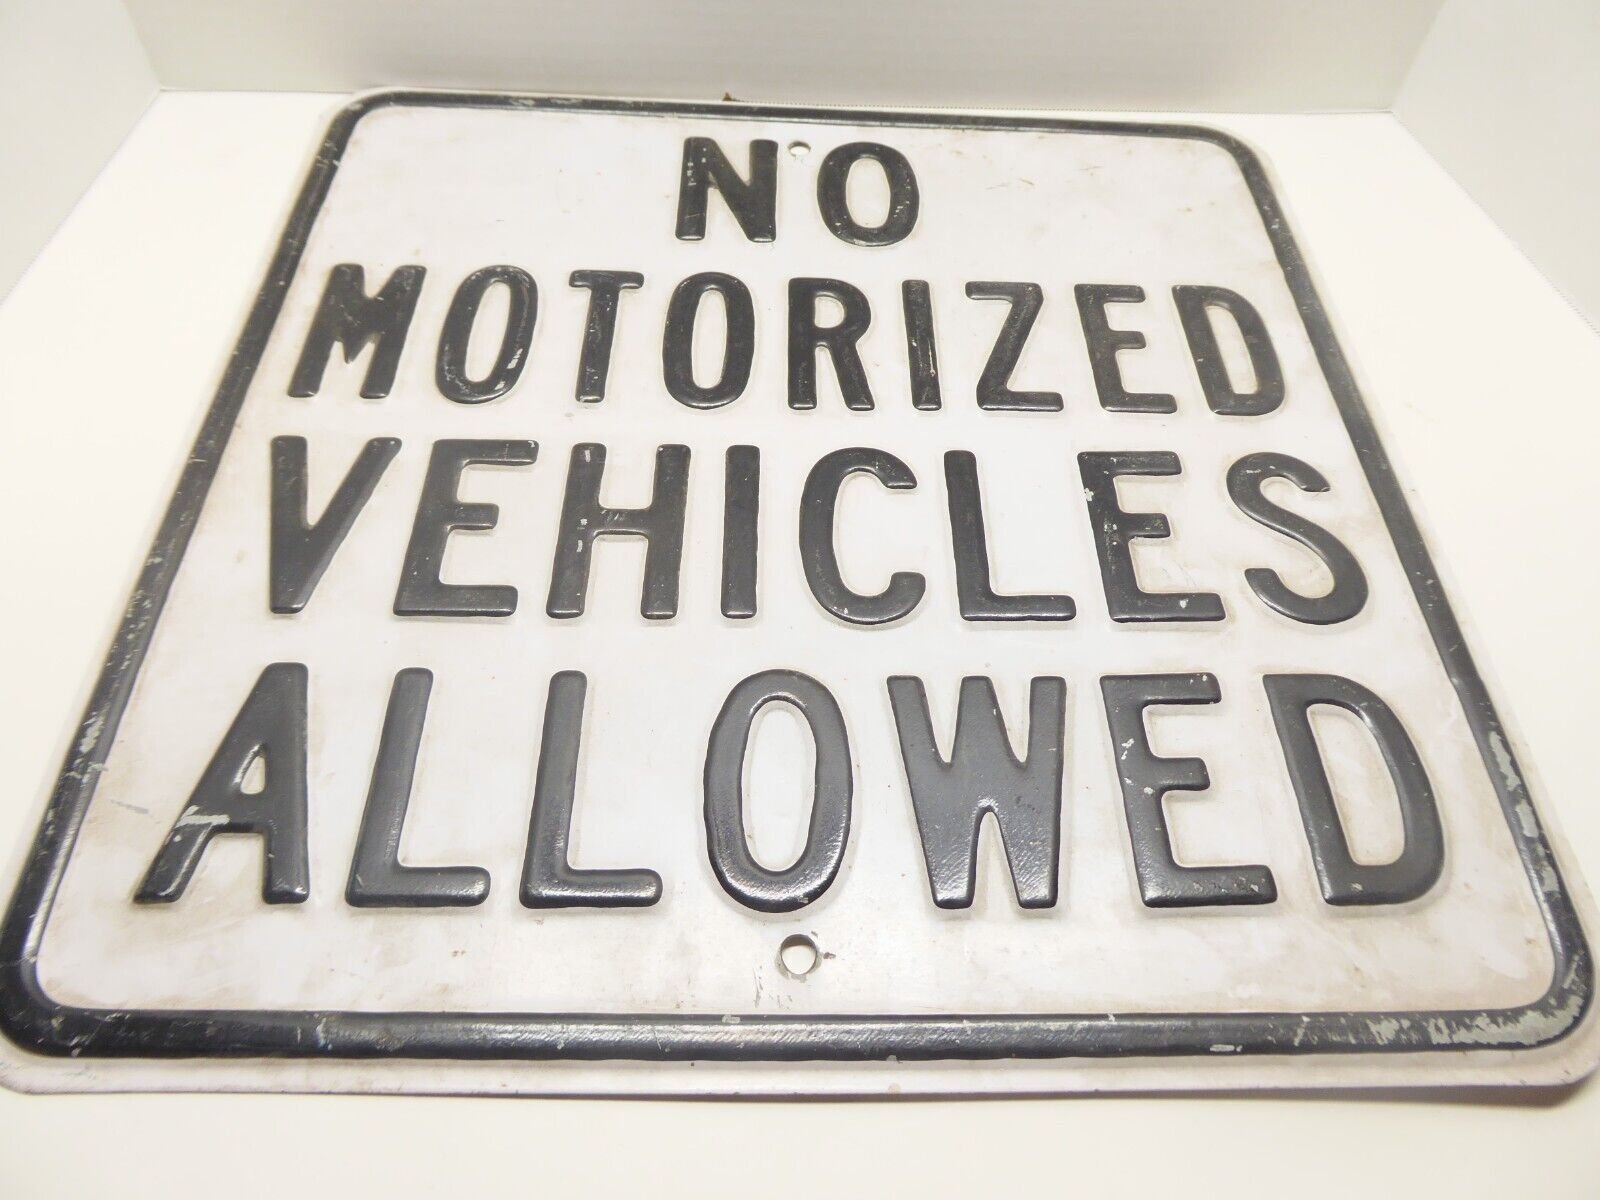 No Motorized Vehicles Allowed, Stamped Sign, excellent condition